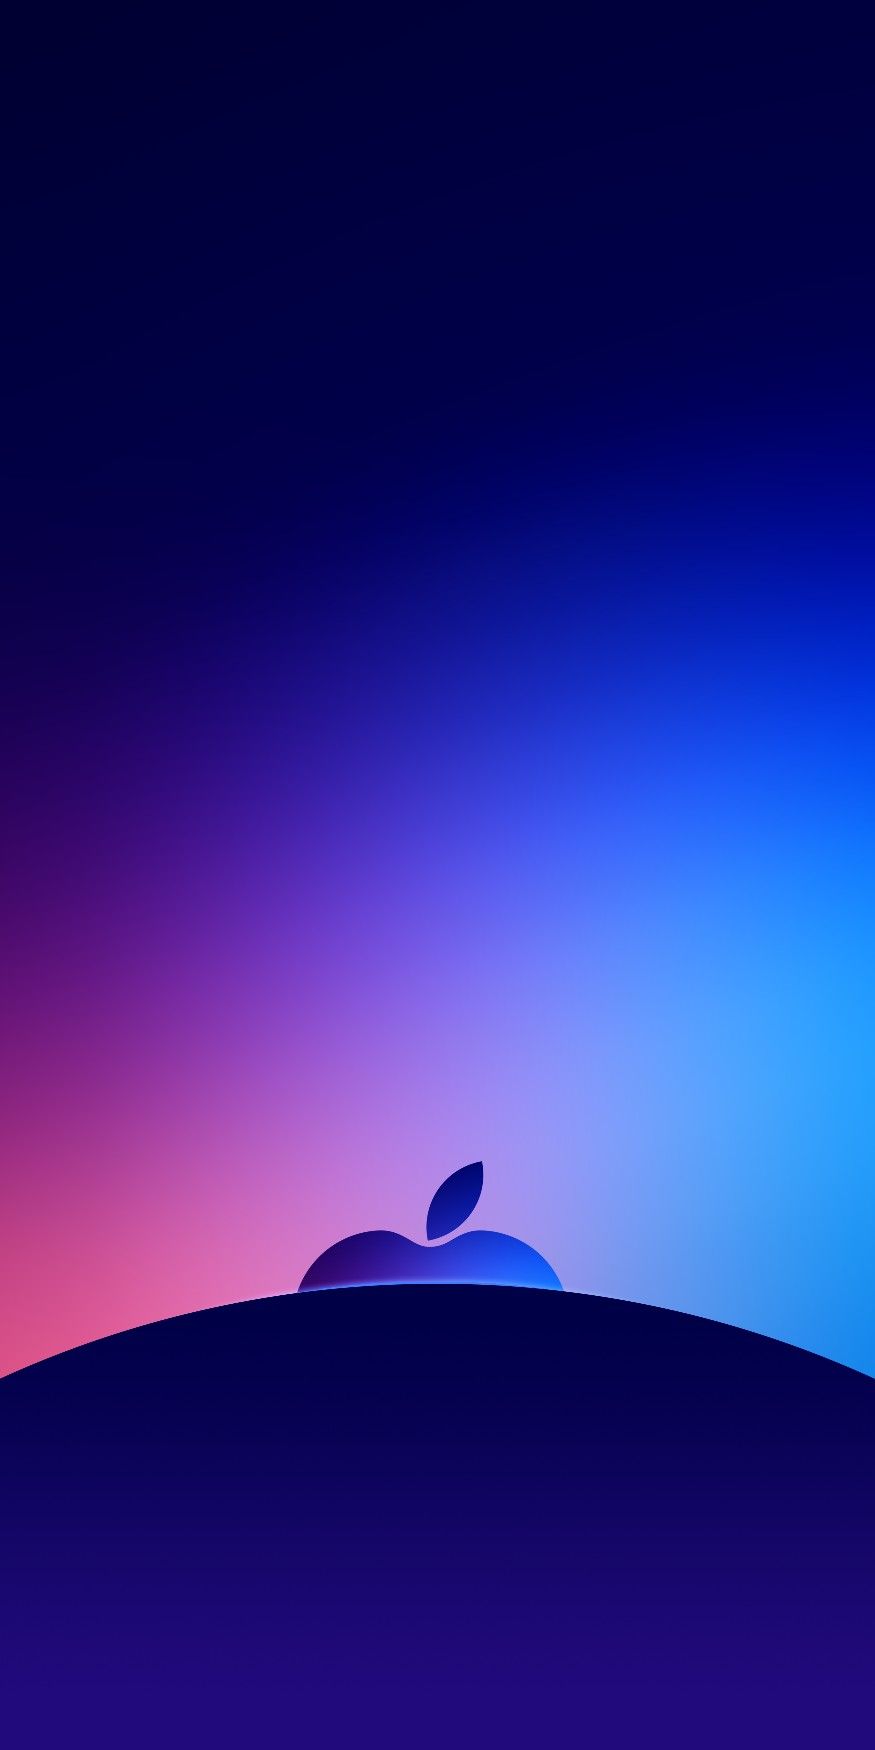 iPhone homescreen wallpaper by privaterayan on Sick wallpaper